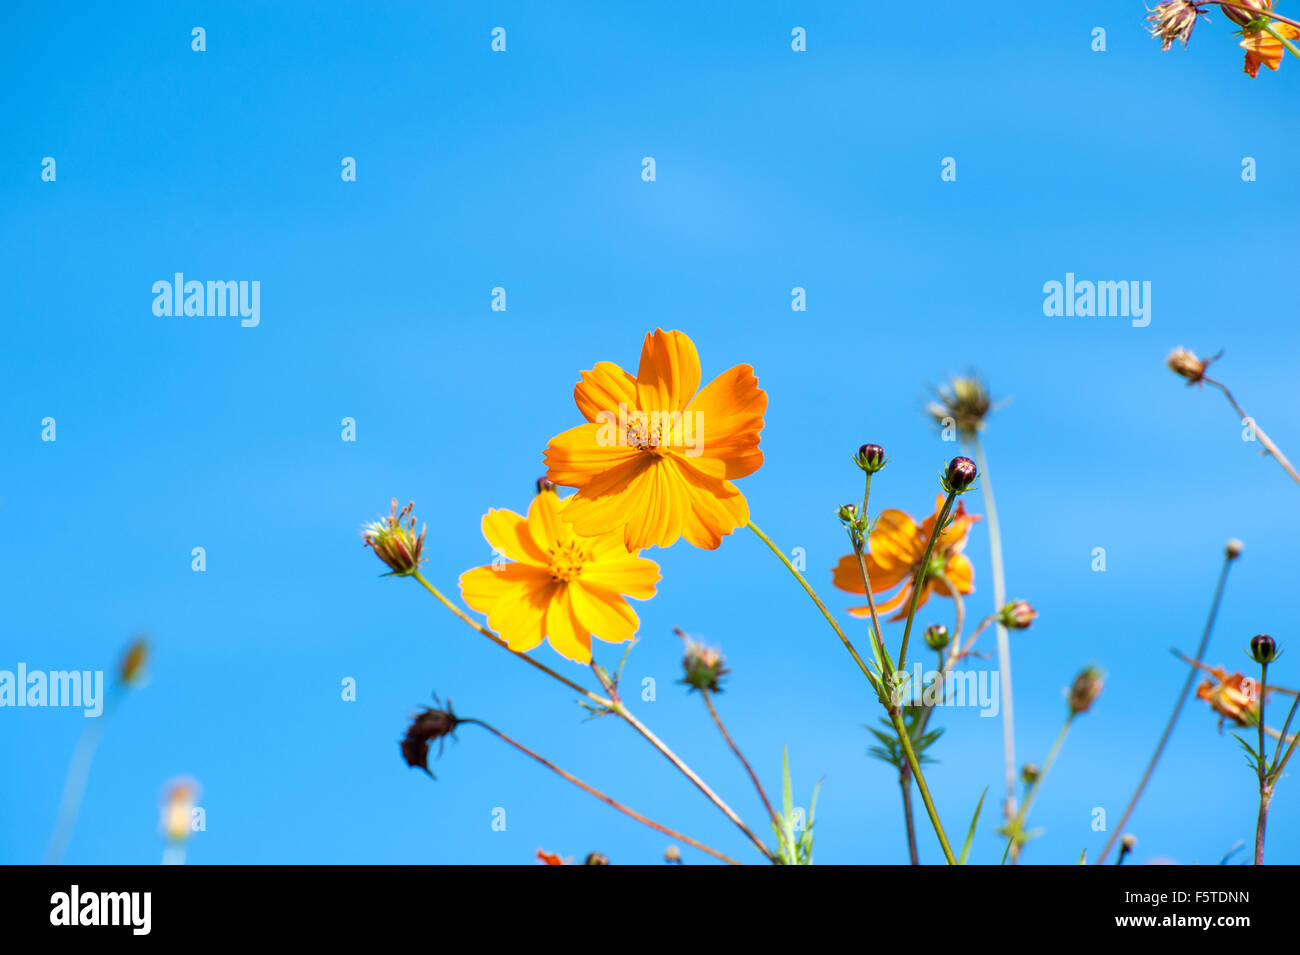 Beautiful yellow flowers in the garden Cosmos bipinnatus or Mexican aster Stock Photo